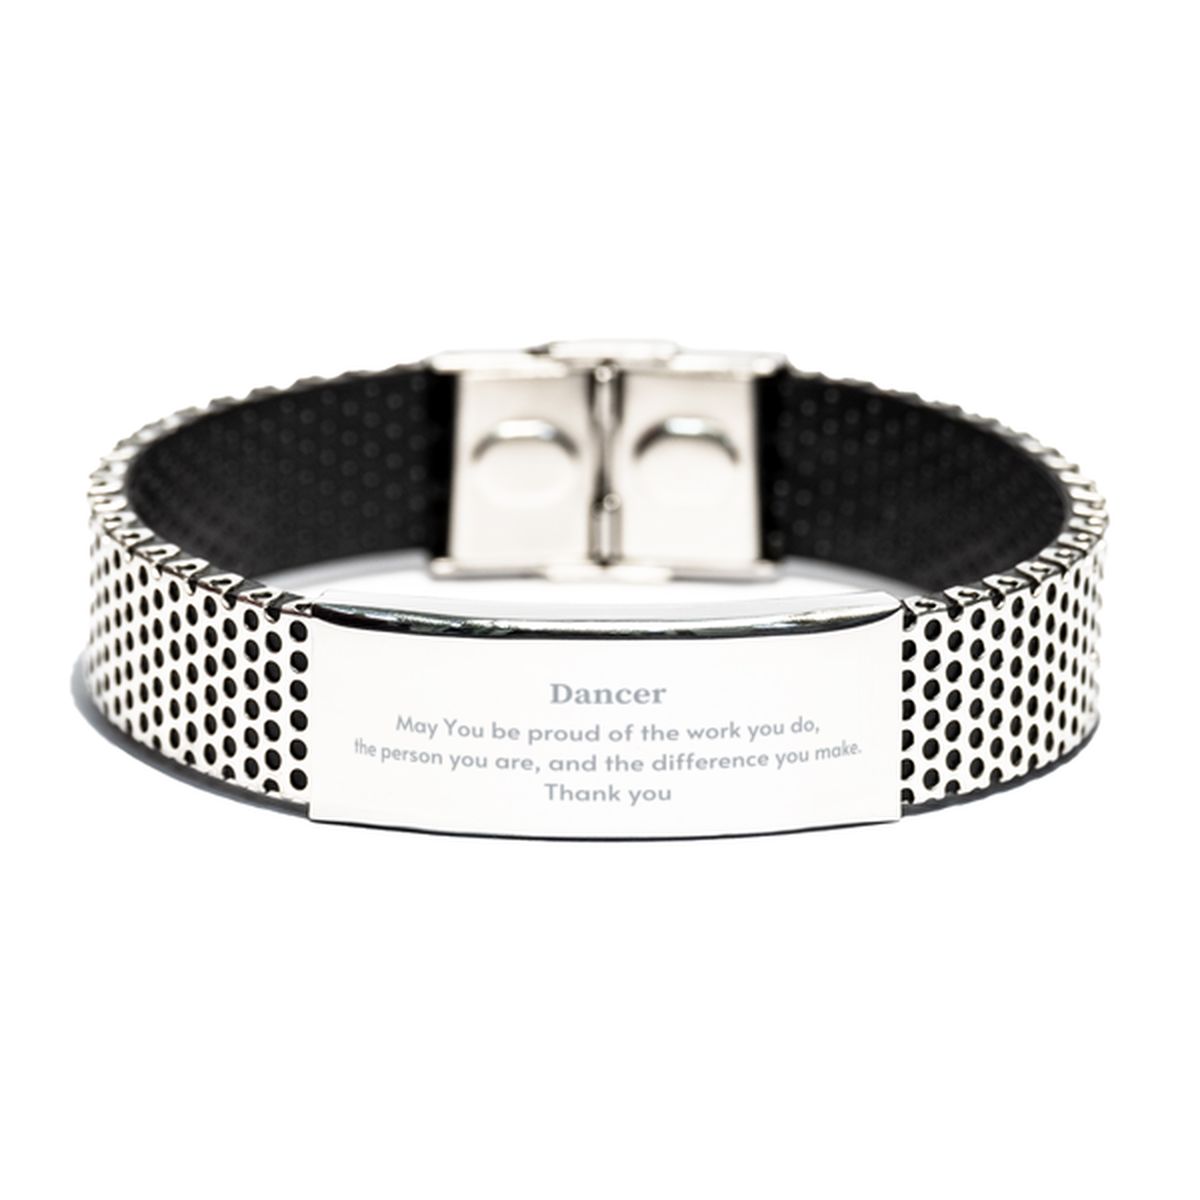 Heartwarming Stainless Steel Bracelet Retirement Coworkers Gifts for Dancer, Dancer May You be proud of the work you do, the person you are Gifts for Boss Men Women Friends